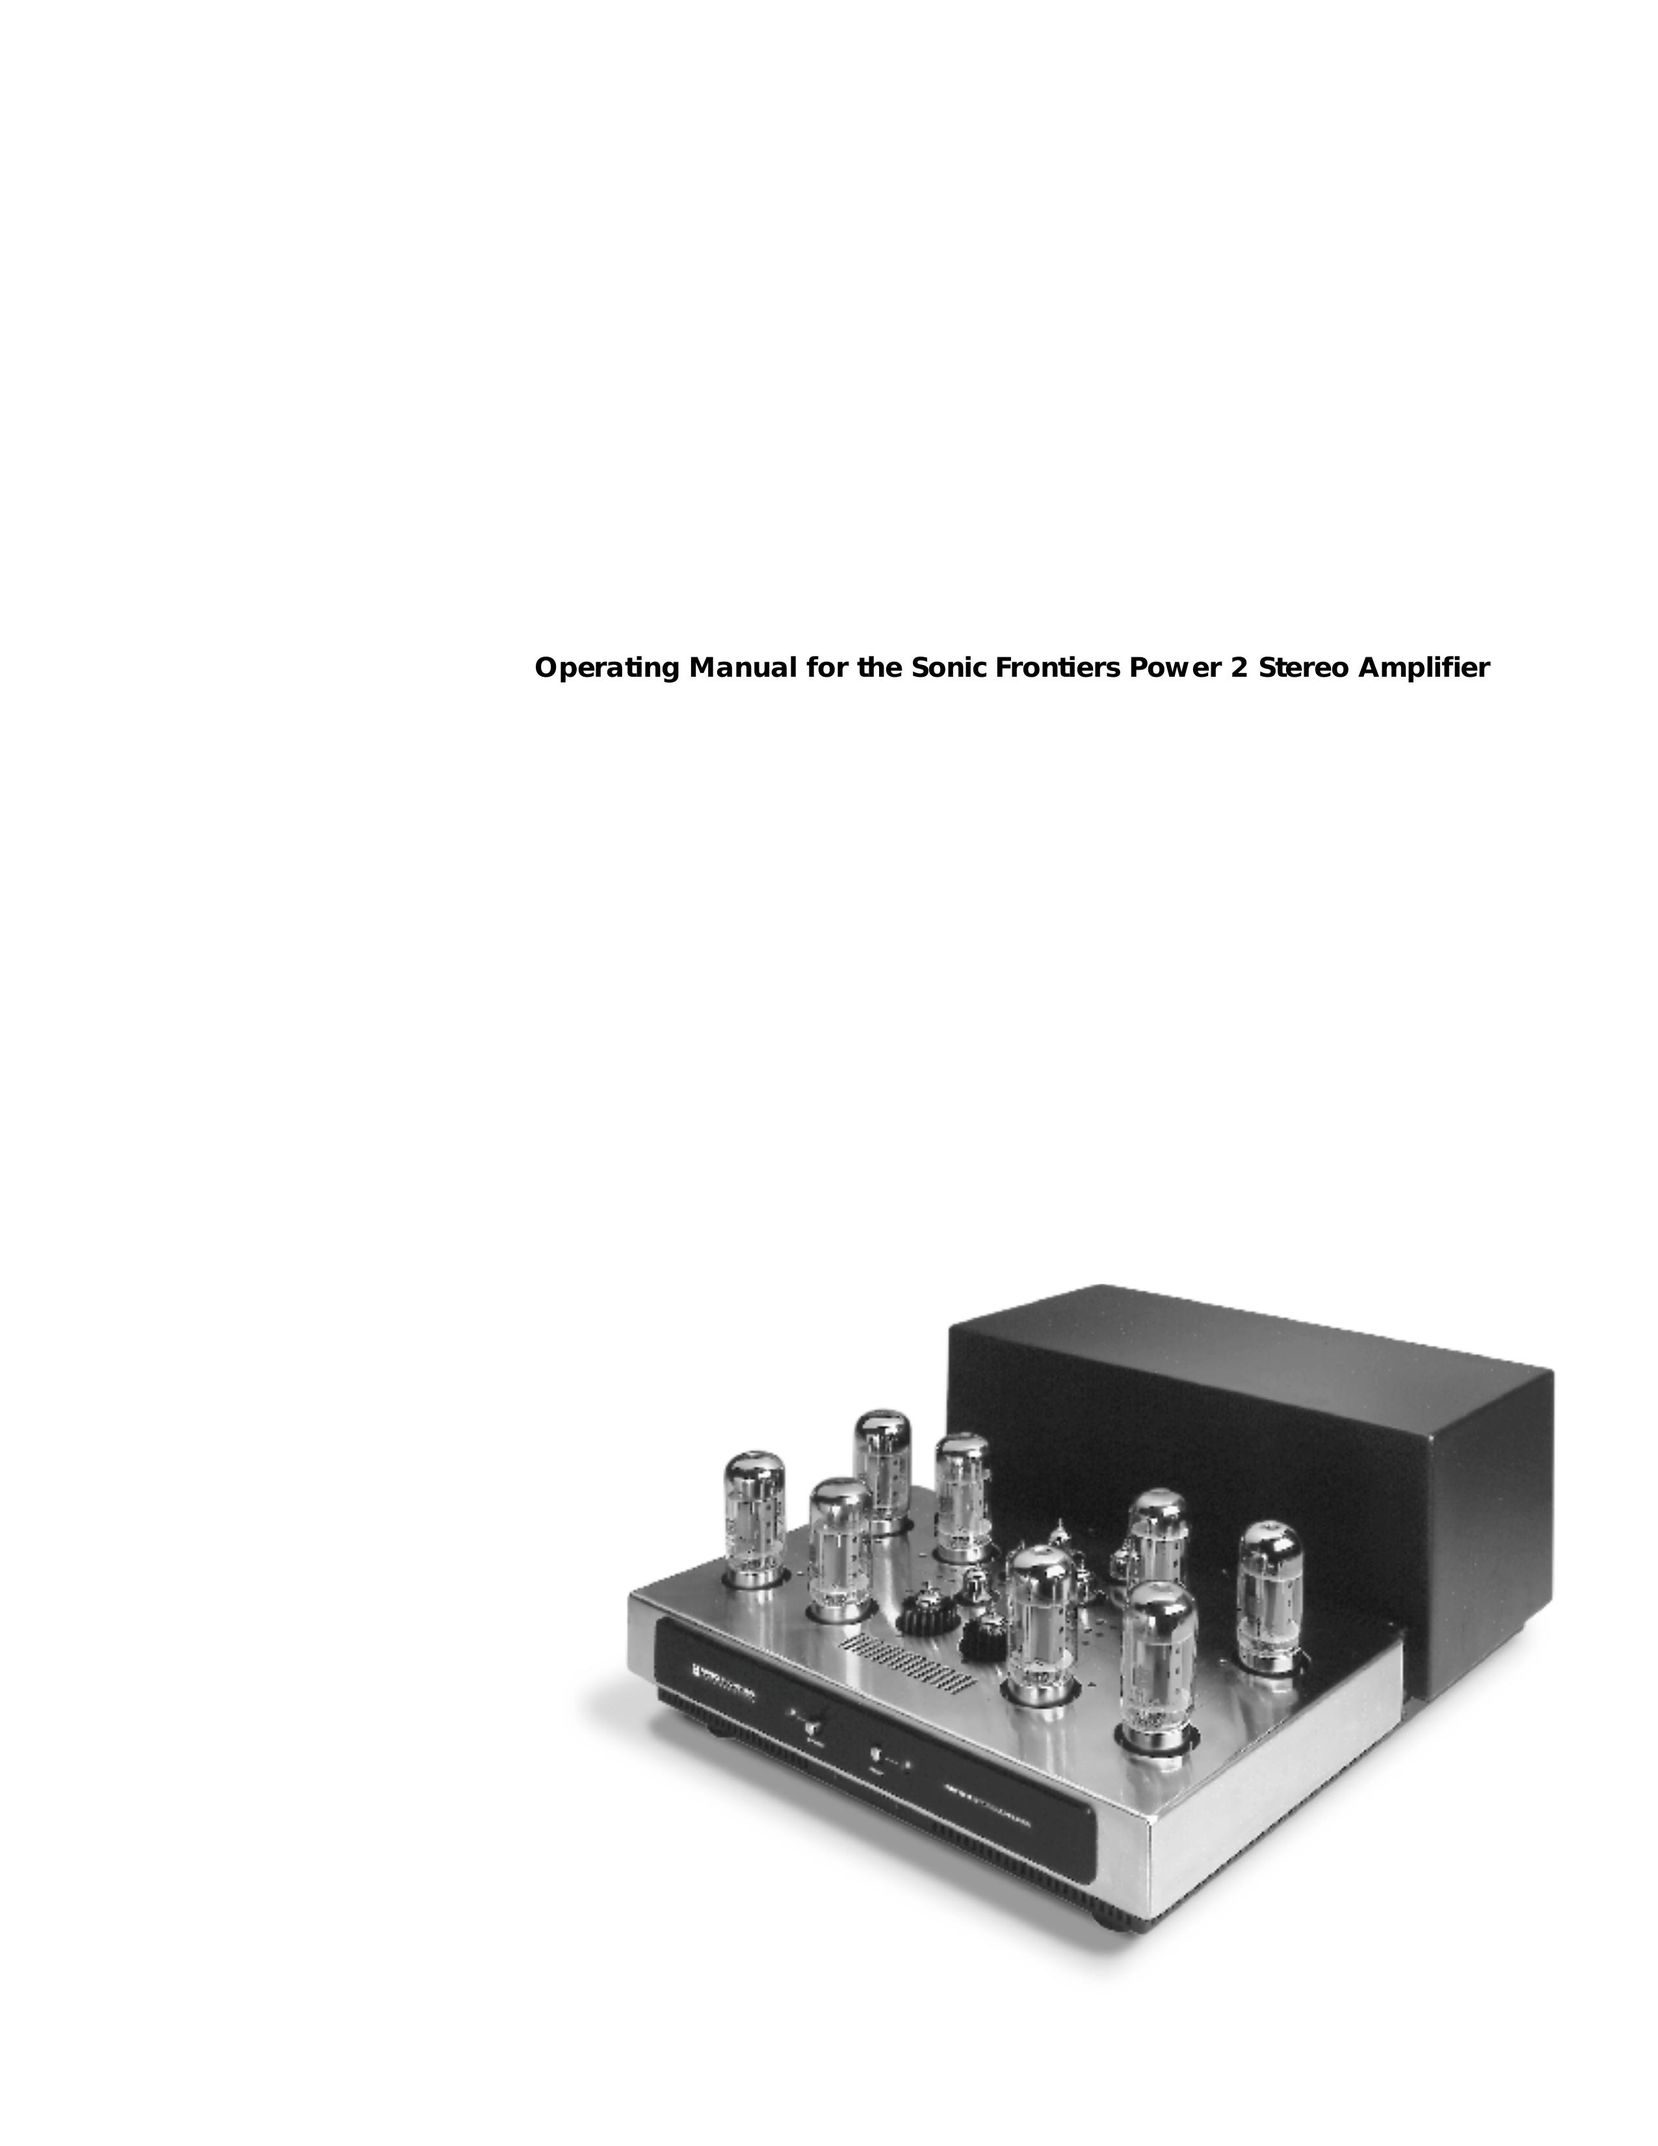 Sonic Impact Technologies Power 2 Stereo Amplifier User Manual